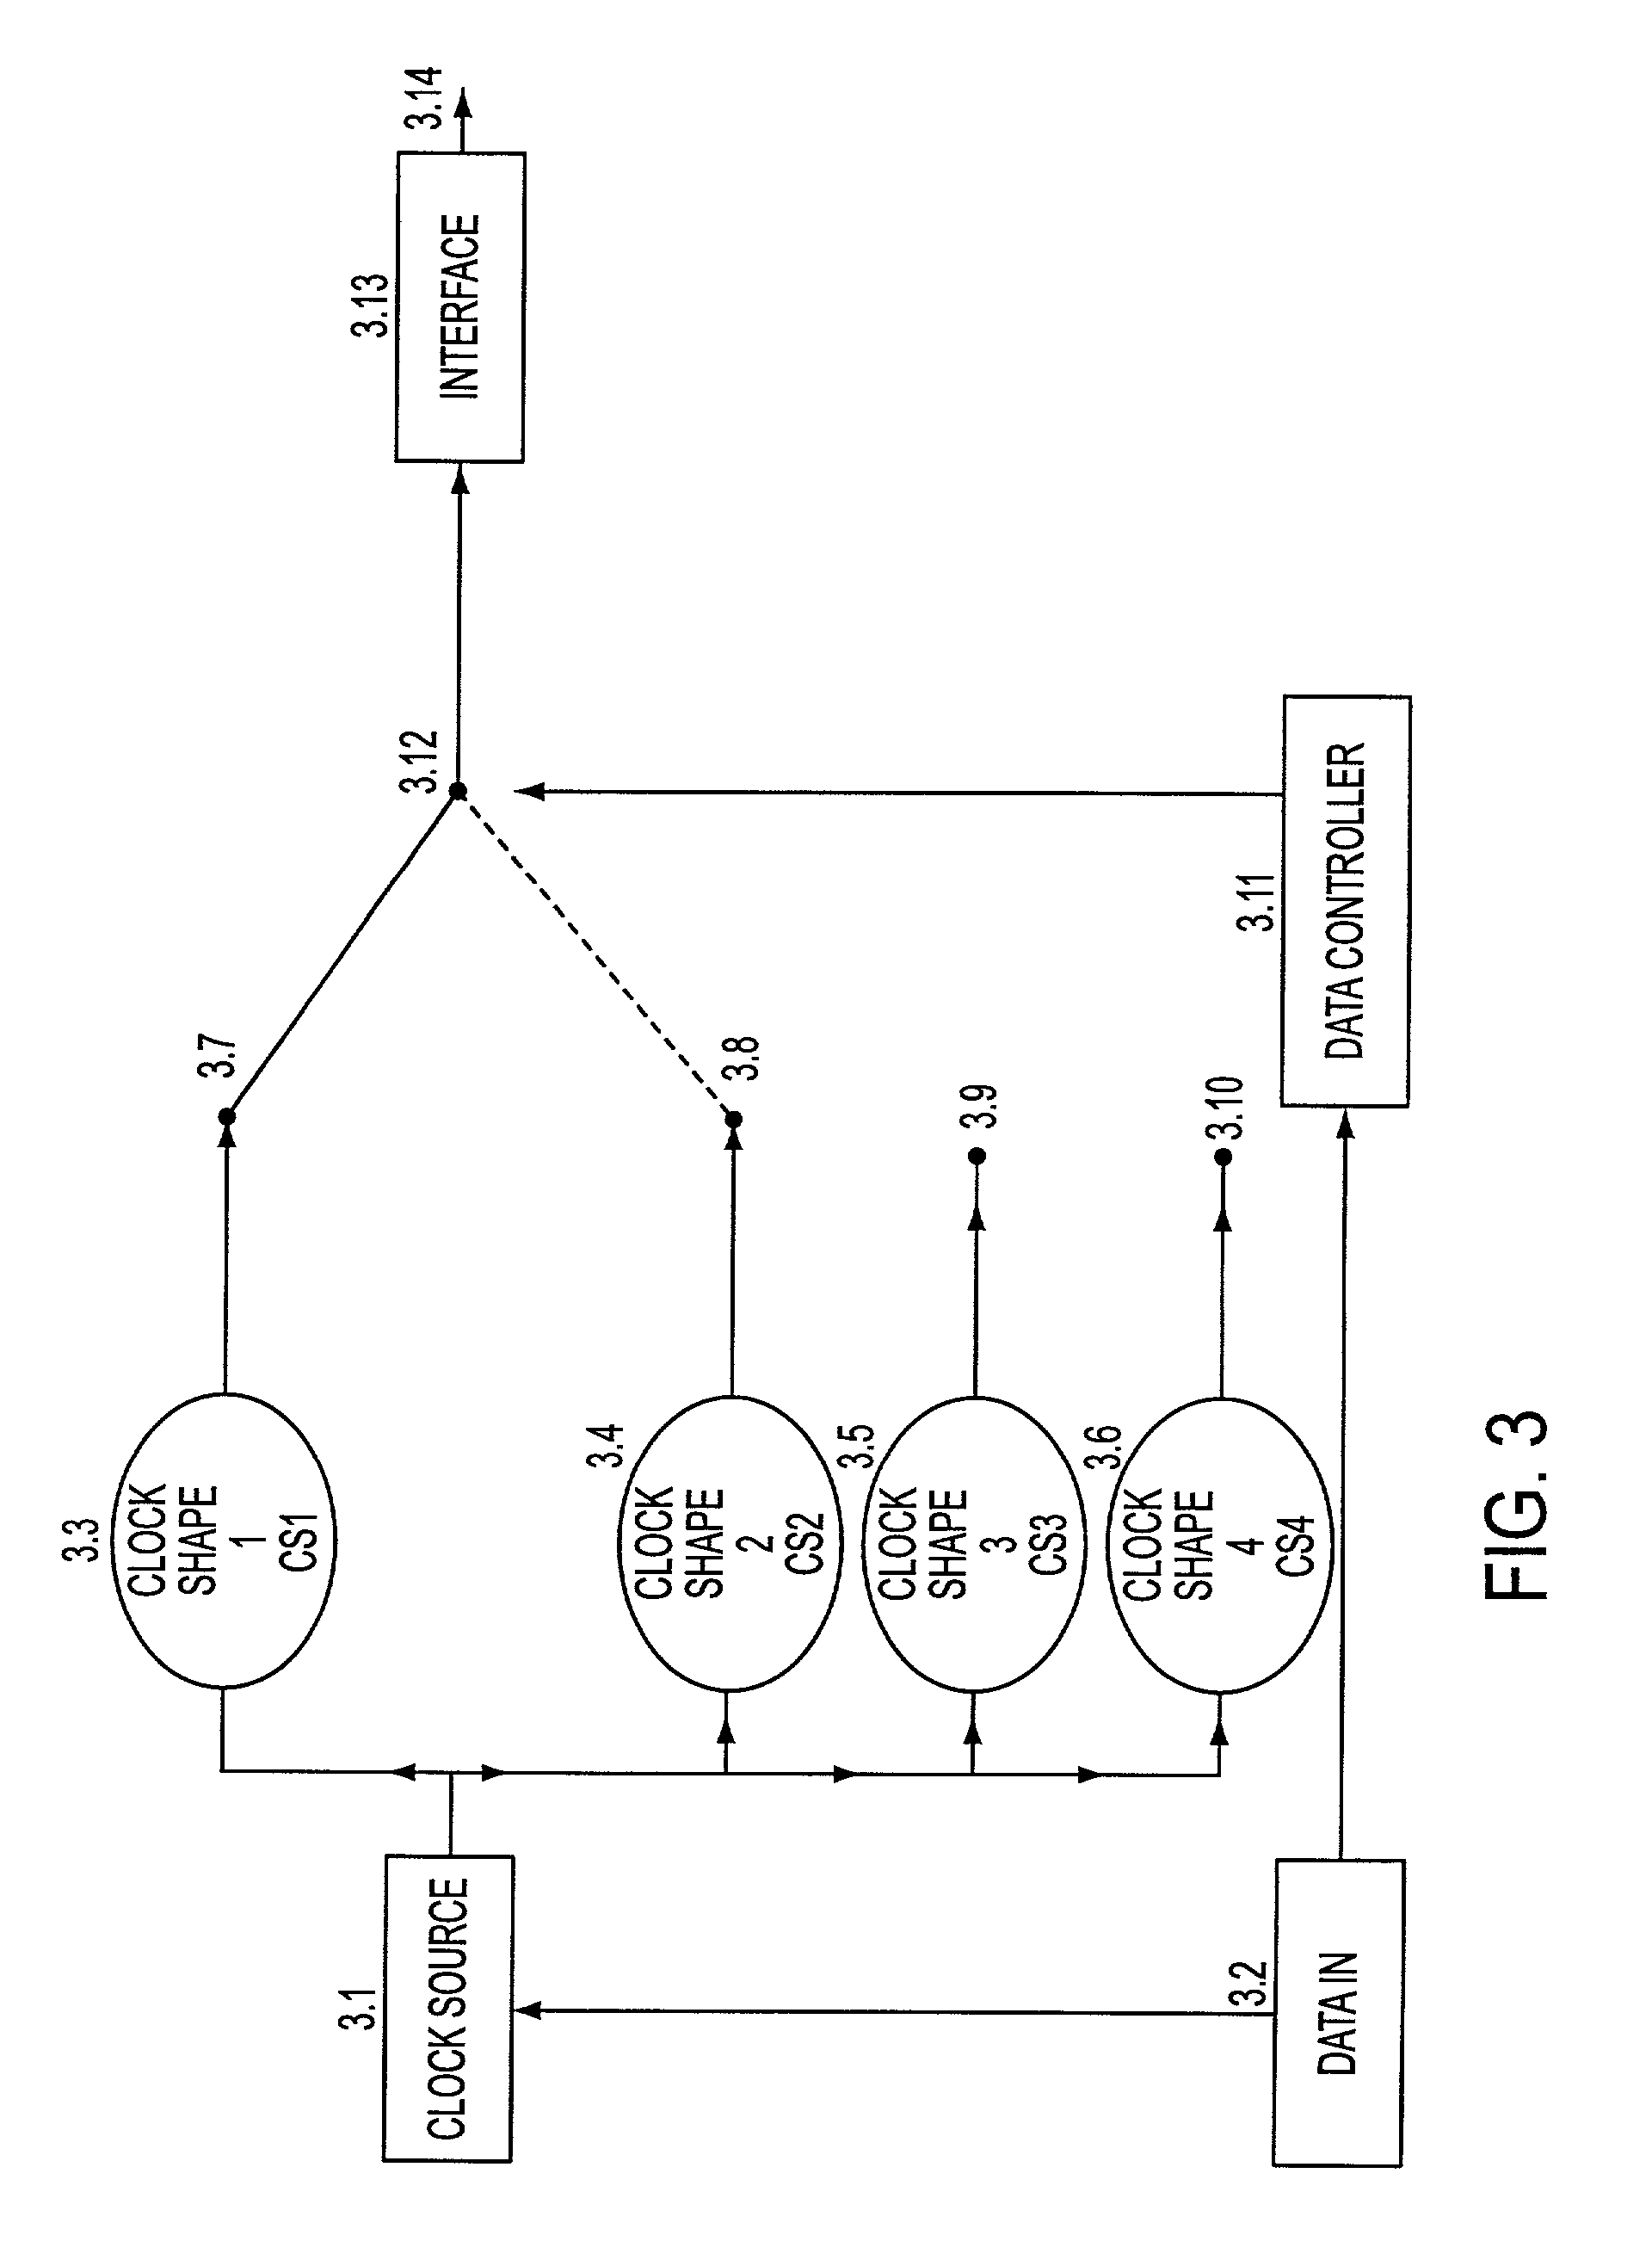 Feher keying (FK) modulation and transceivers including clock shaping processors